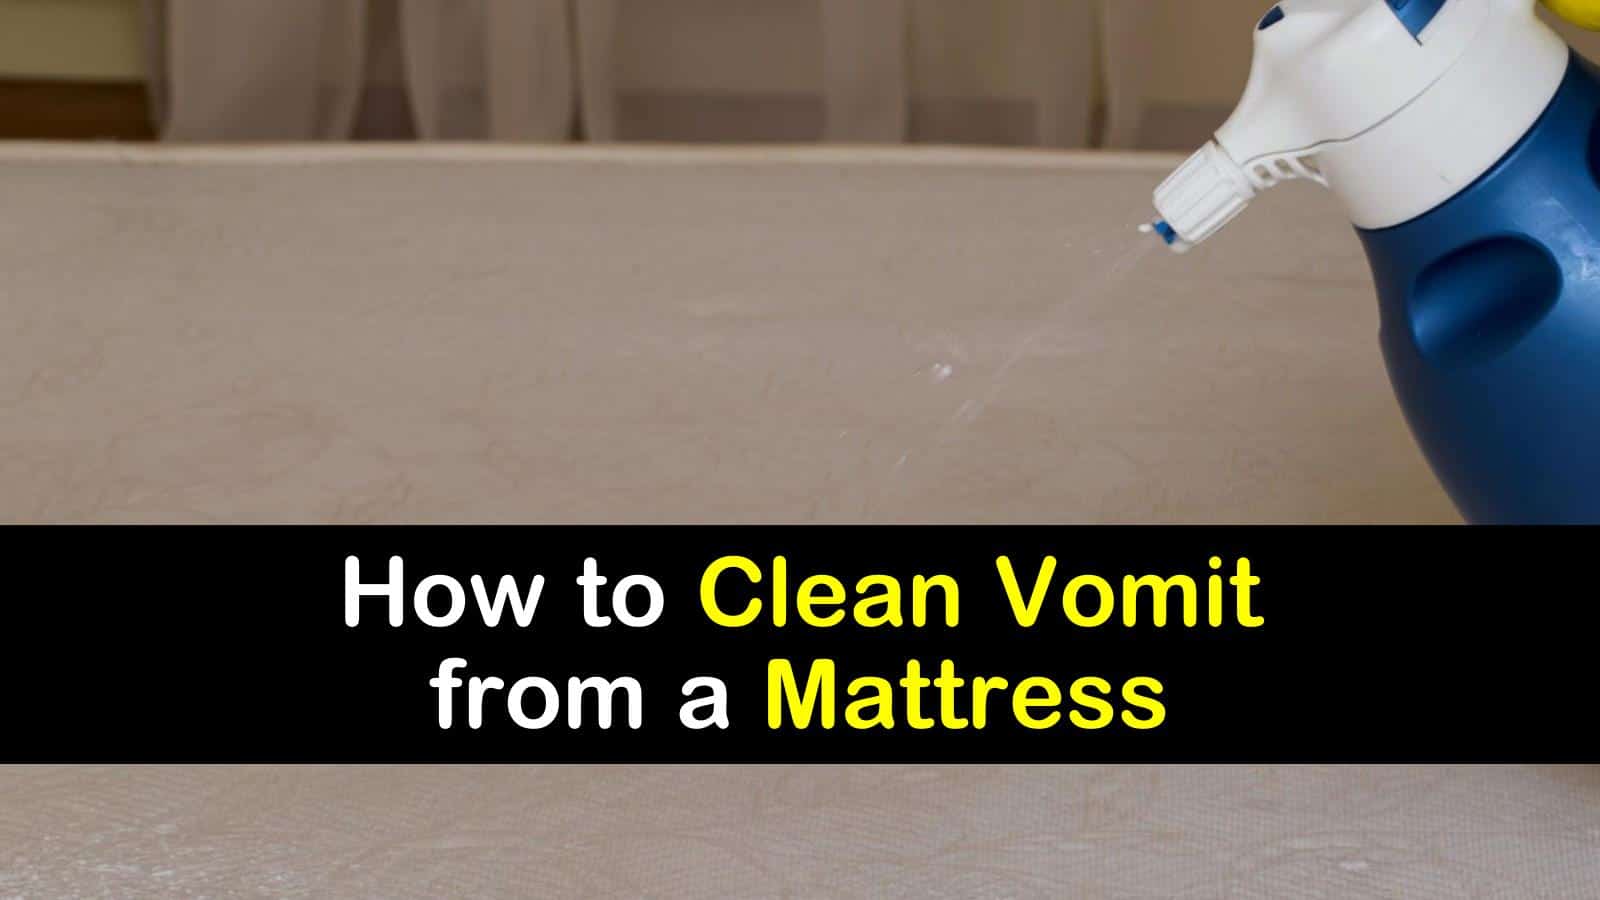 how to clean vomit from a mattress titleimg1